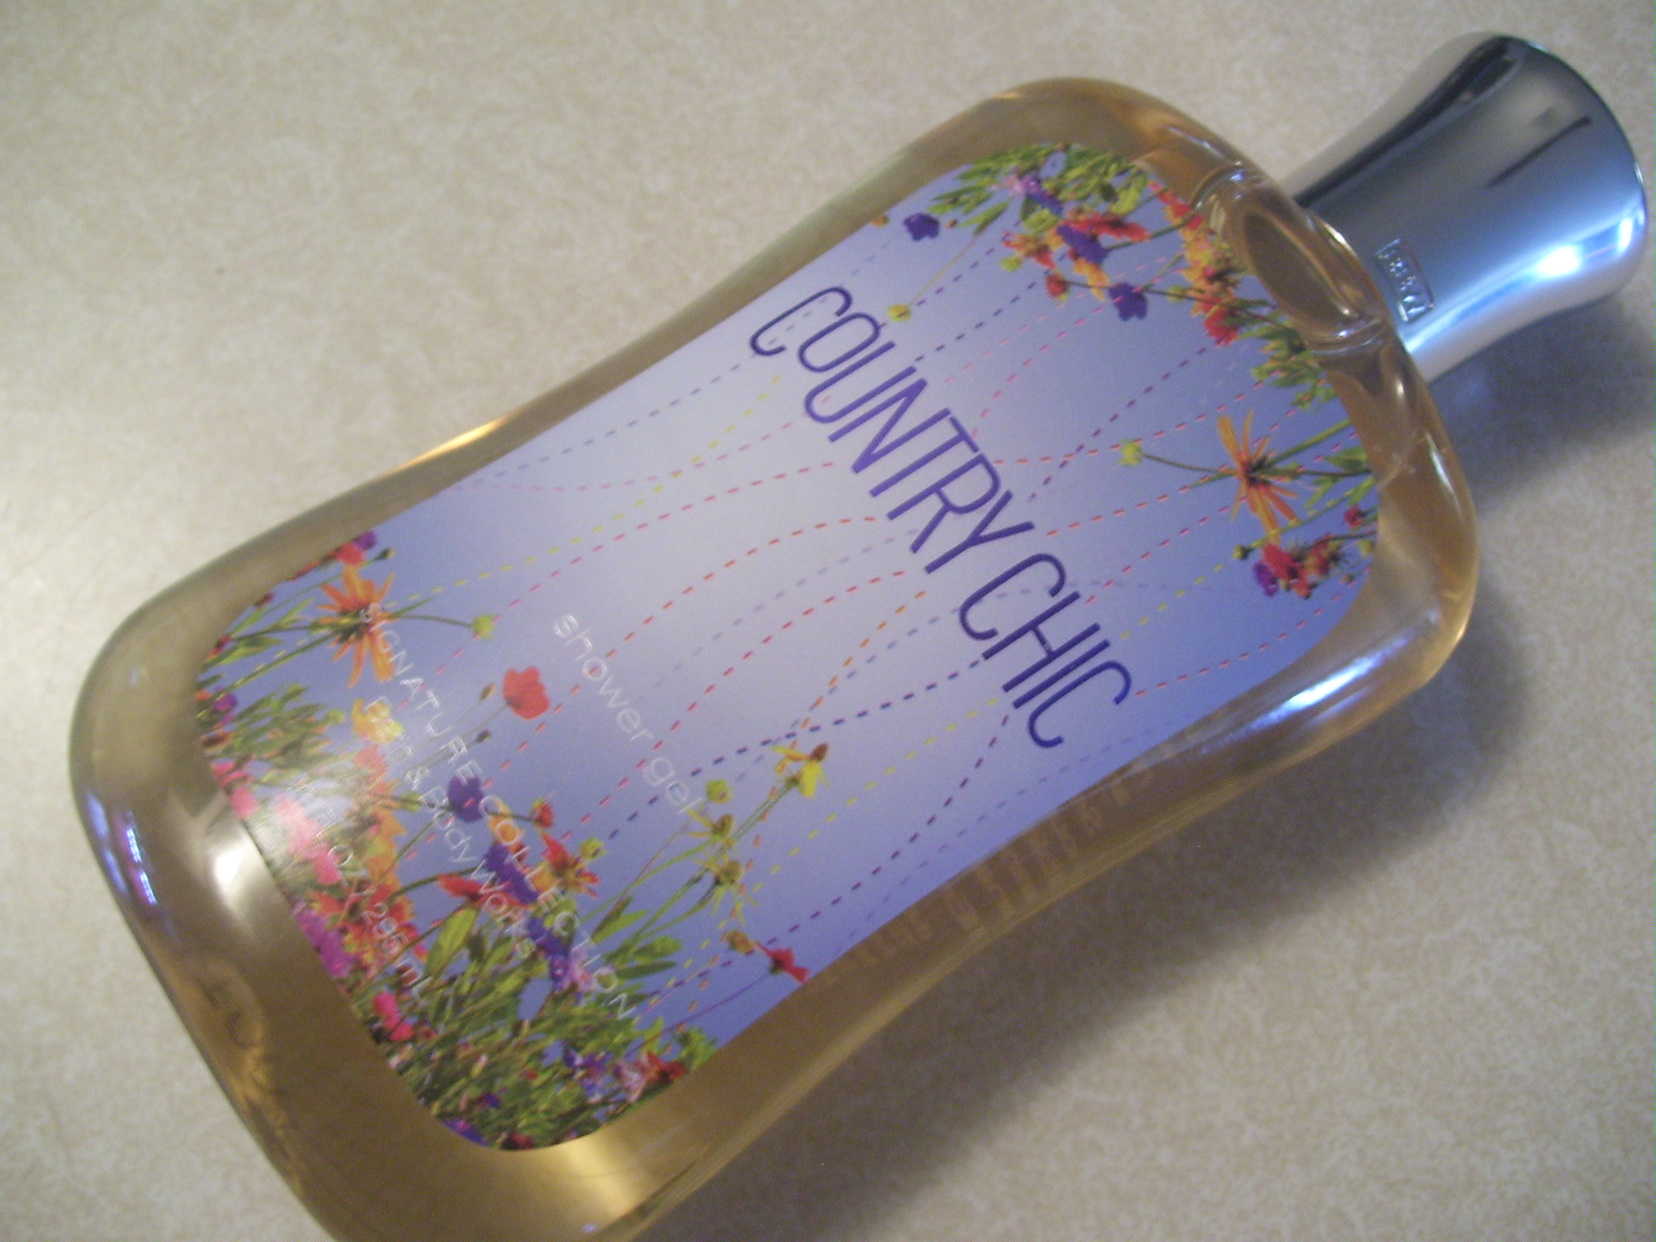 It’s a Bath &Body Works Duel:  Country Chic vs Into the Wild Shower Gels